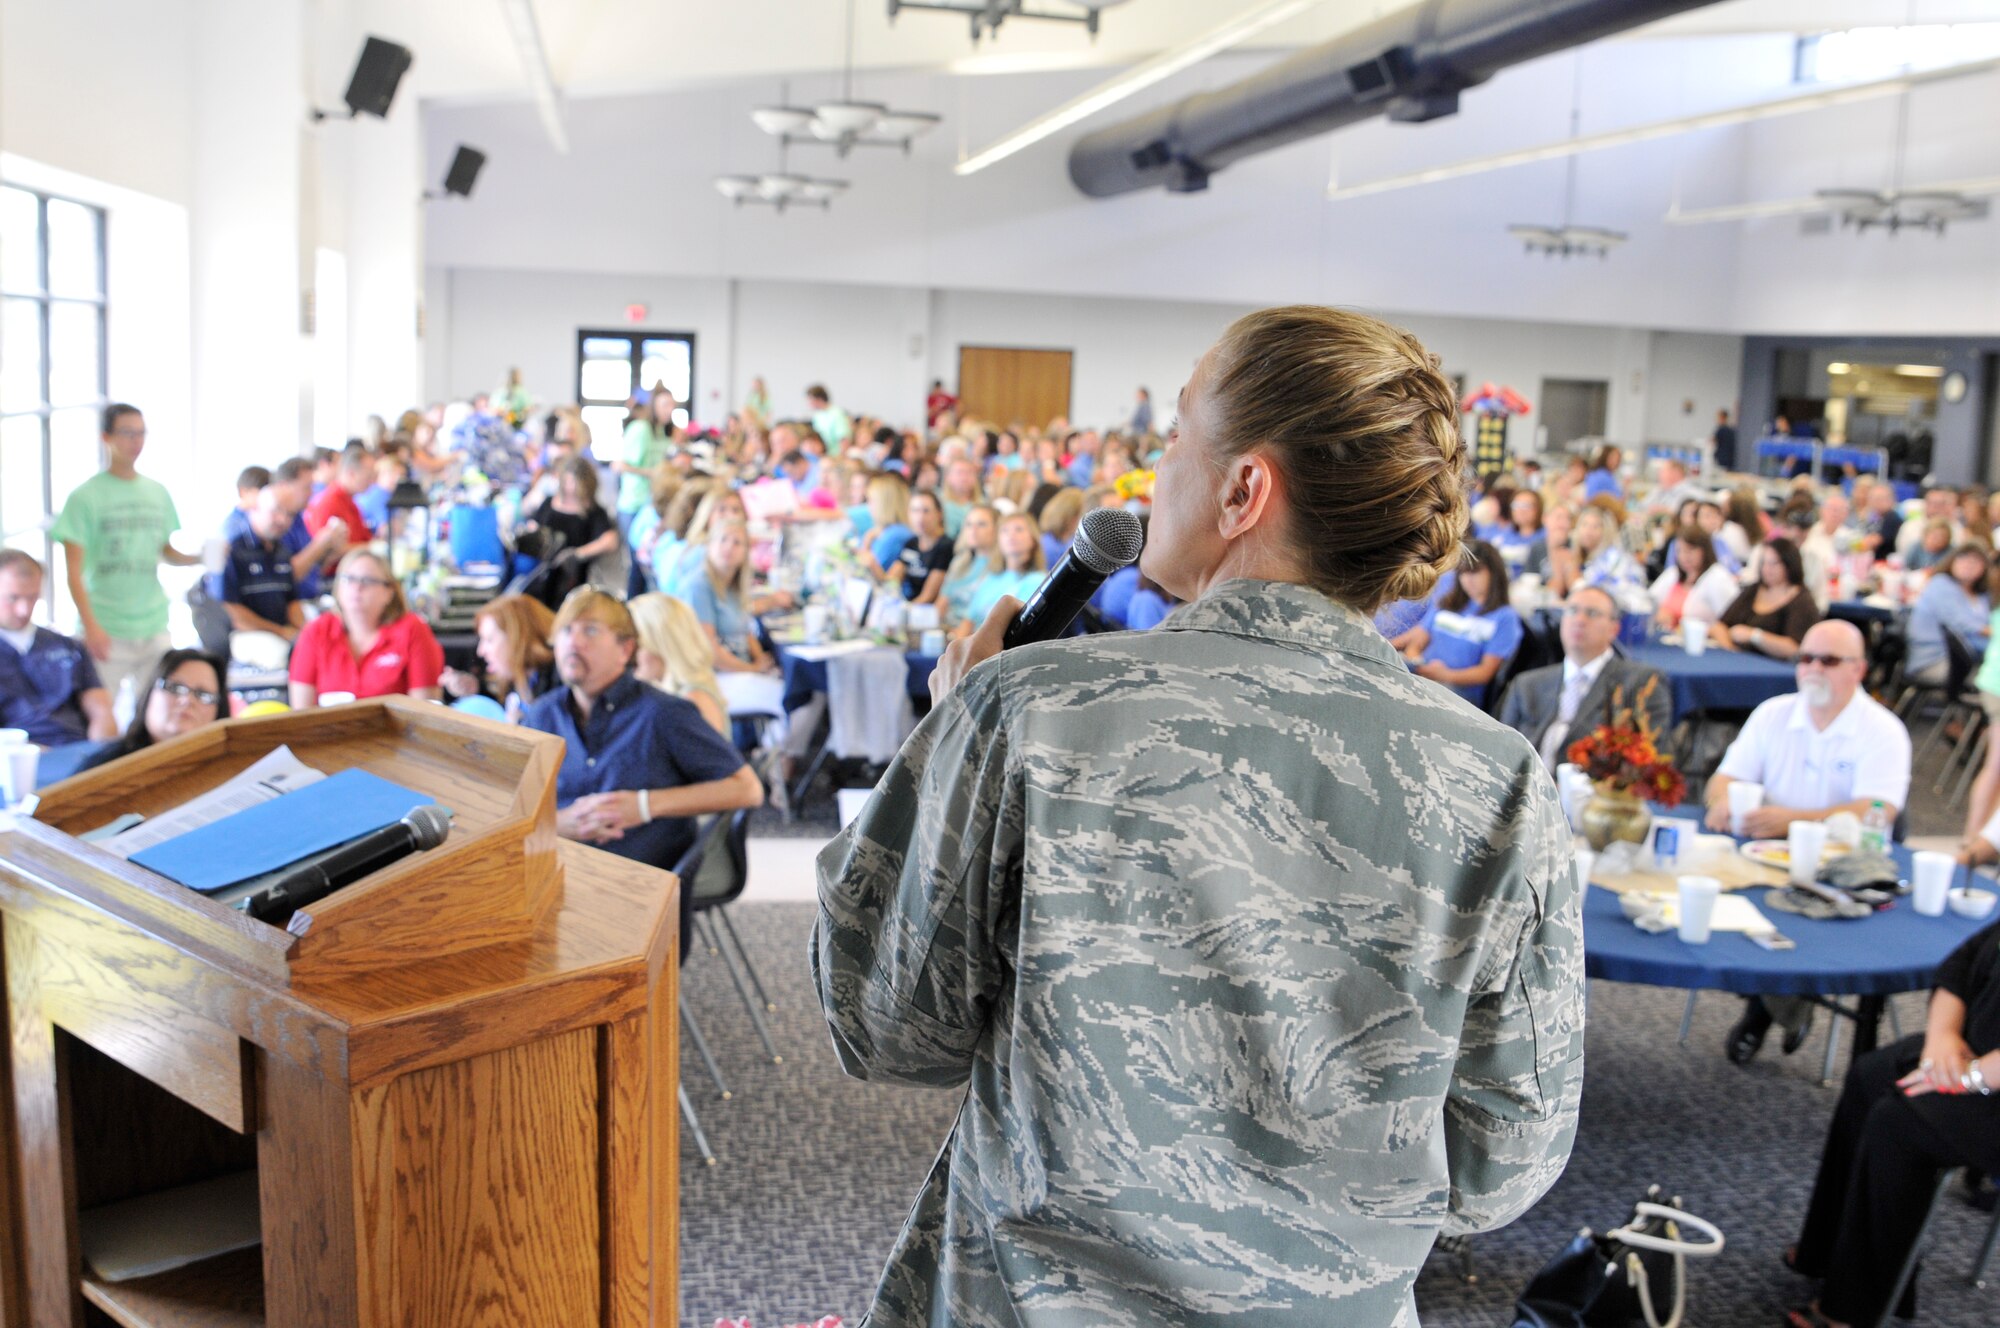 Col. Bobbi Doorenbos, 188th Wing commander, addresses Greenwood school teachers Aug. 13, 2015, at the high school in Greenwood, Ark. Doorenbos was invited to speak to teachers at Greenwood schools as a part of their day of inspiration prior to school starting.  She thanked all the teachers for their dedication and passion, and talked about their positive influence in young people's lives and the community. (U.S. Air National Guard photo by Tech. Sgt. Chauncey Reed/Released)